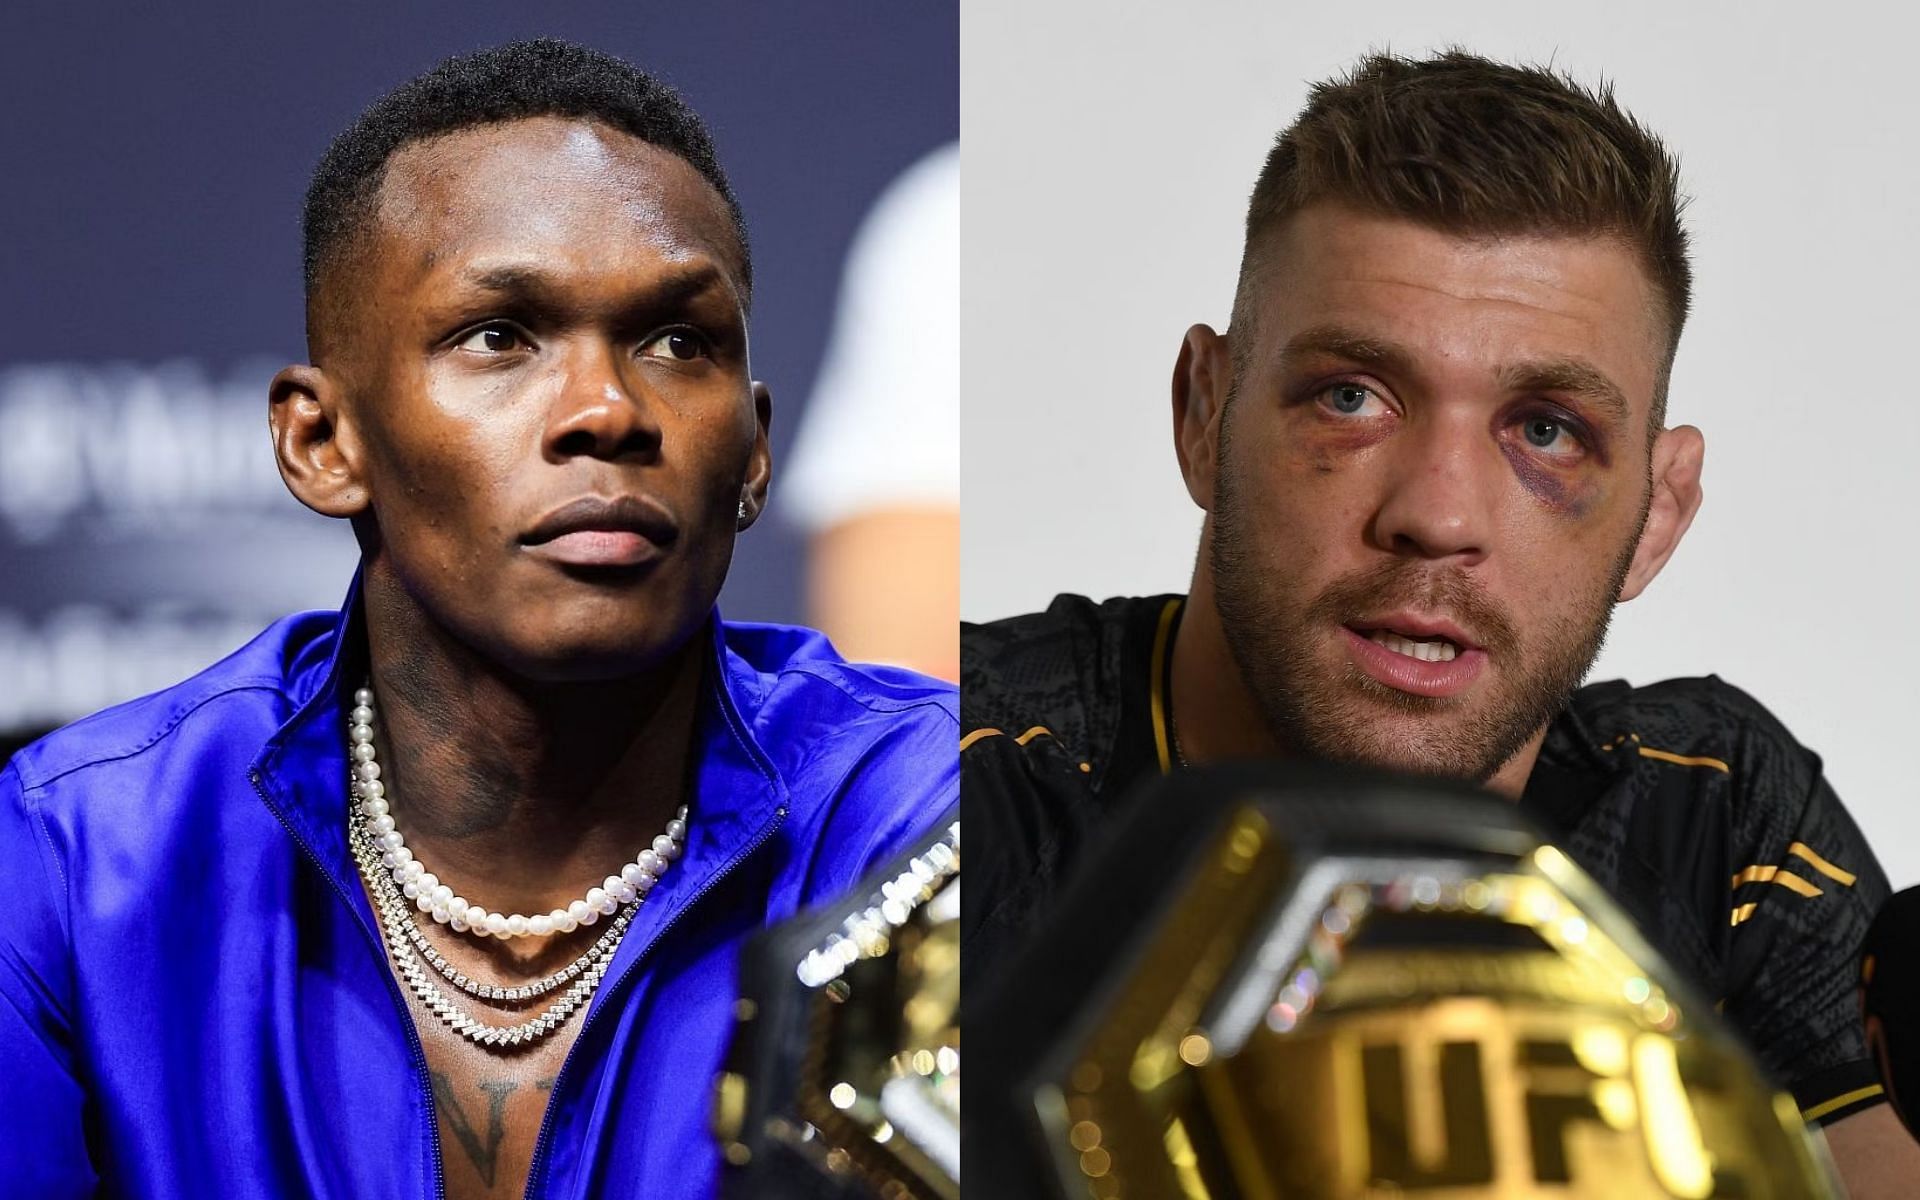 Dricus du Plessis (right) poses UFC Africa challenge to Israel Adesanya (left) after missing out on UFC 300 [Images Courtesy: @GettyImages]